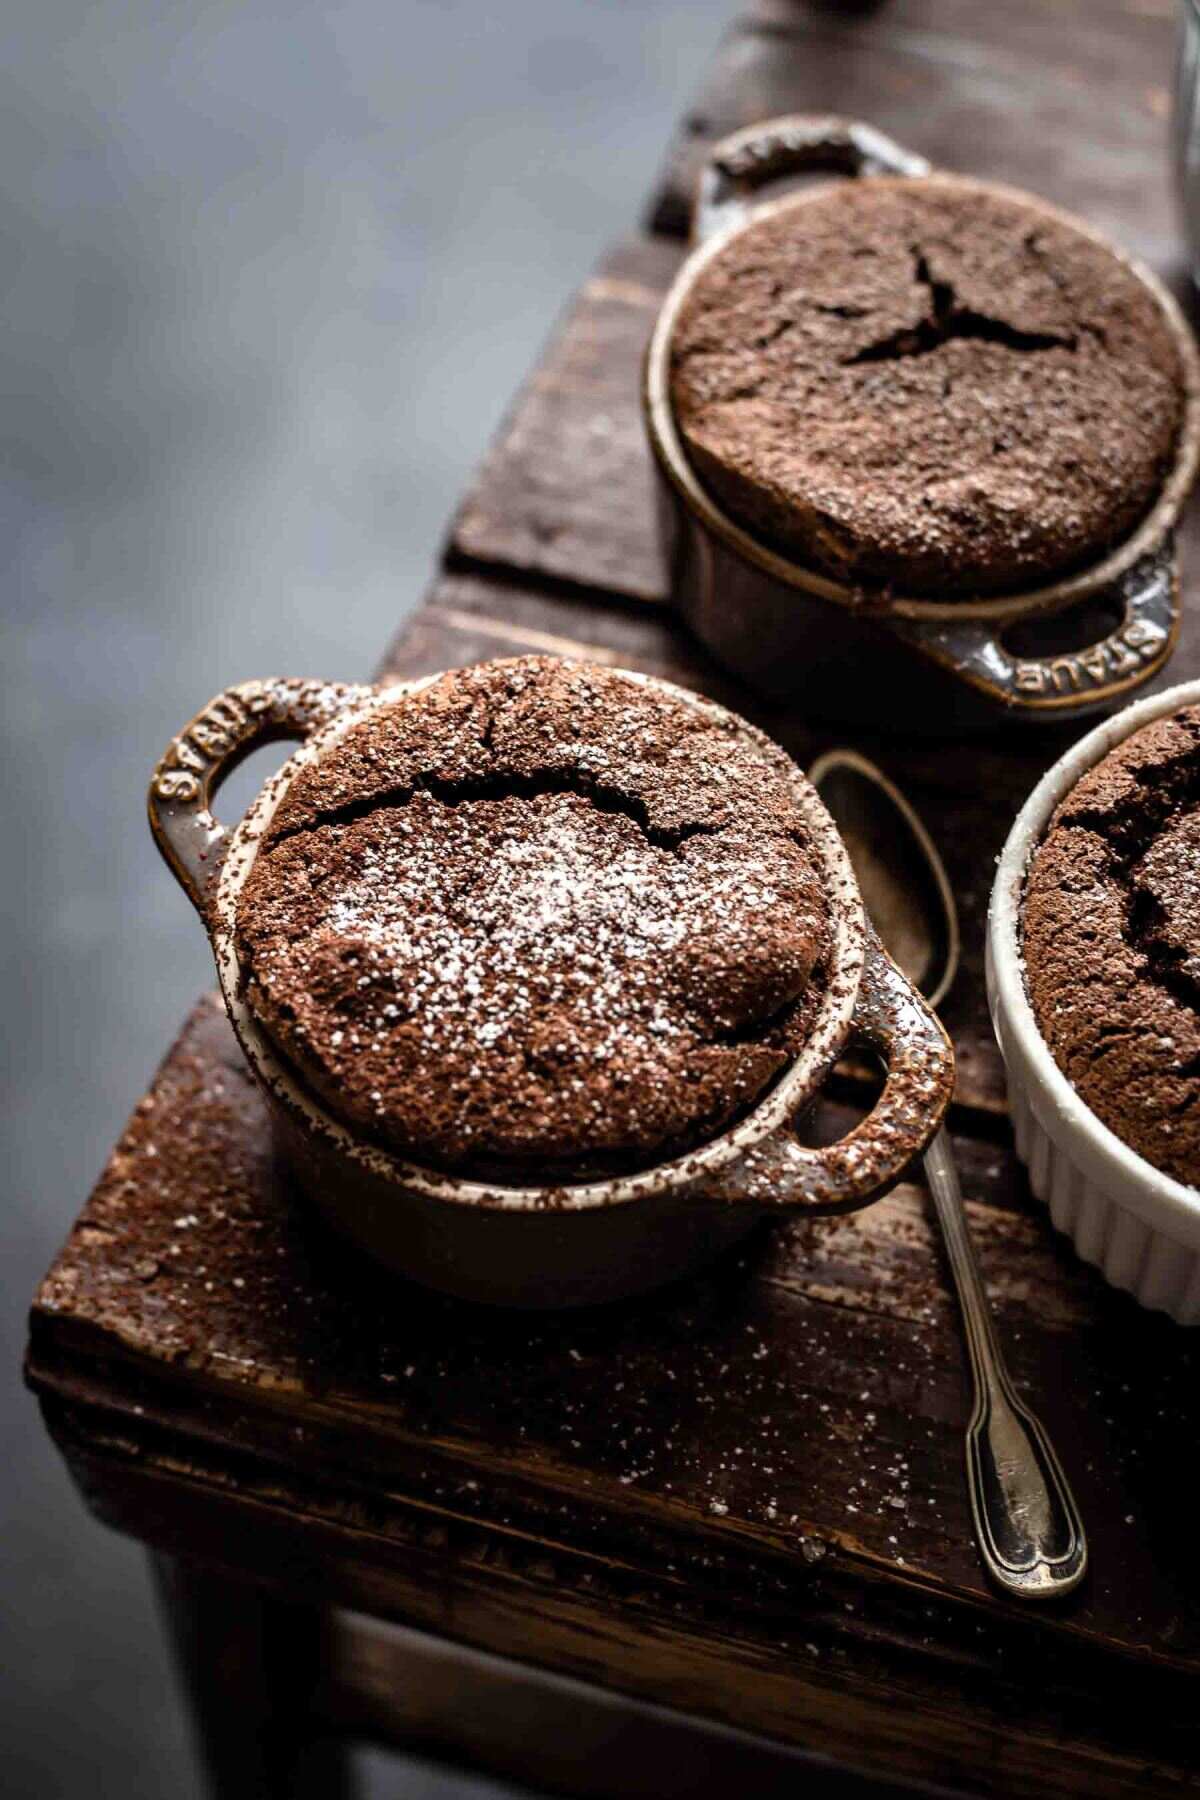 several chocolate souffles ready to eat